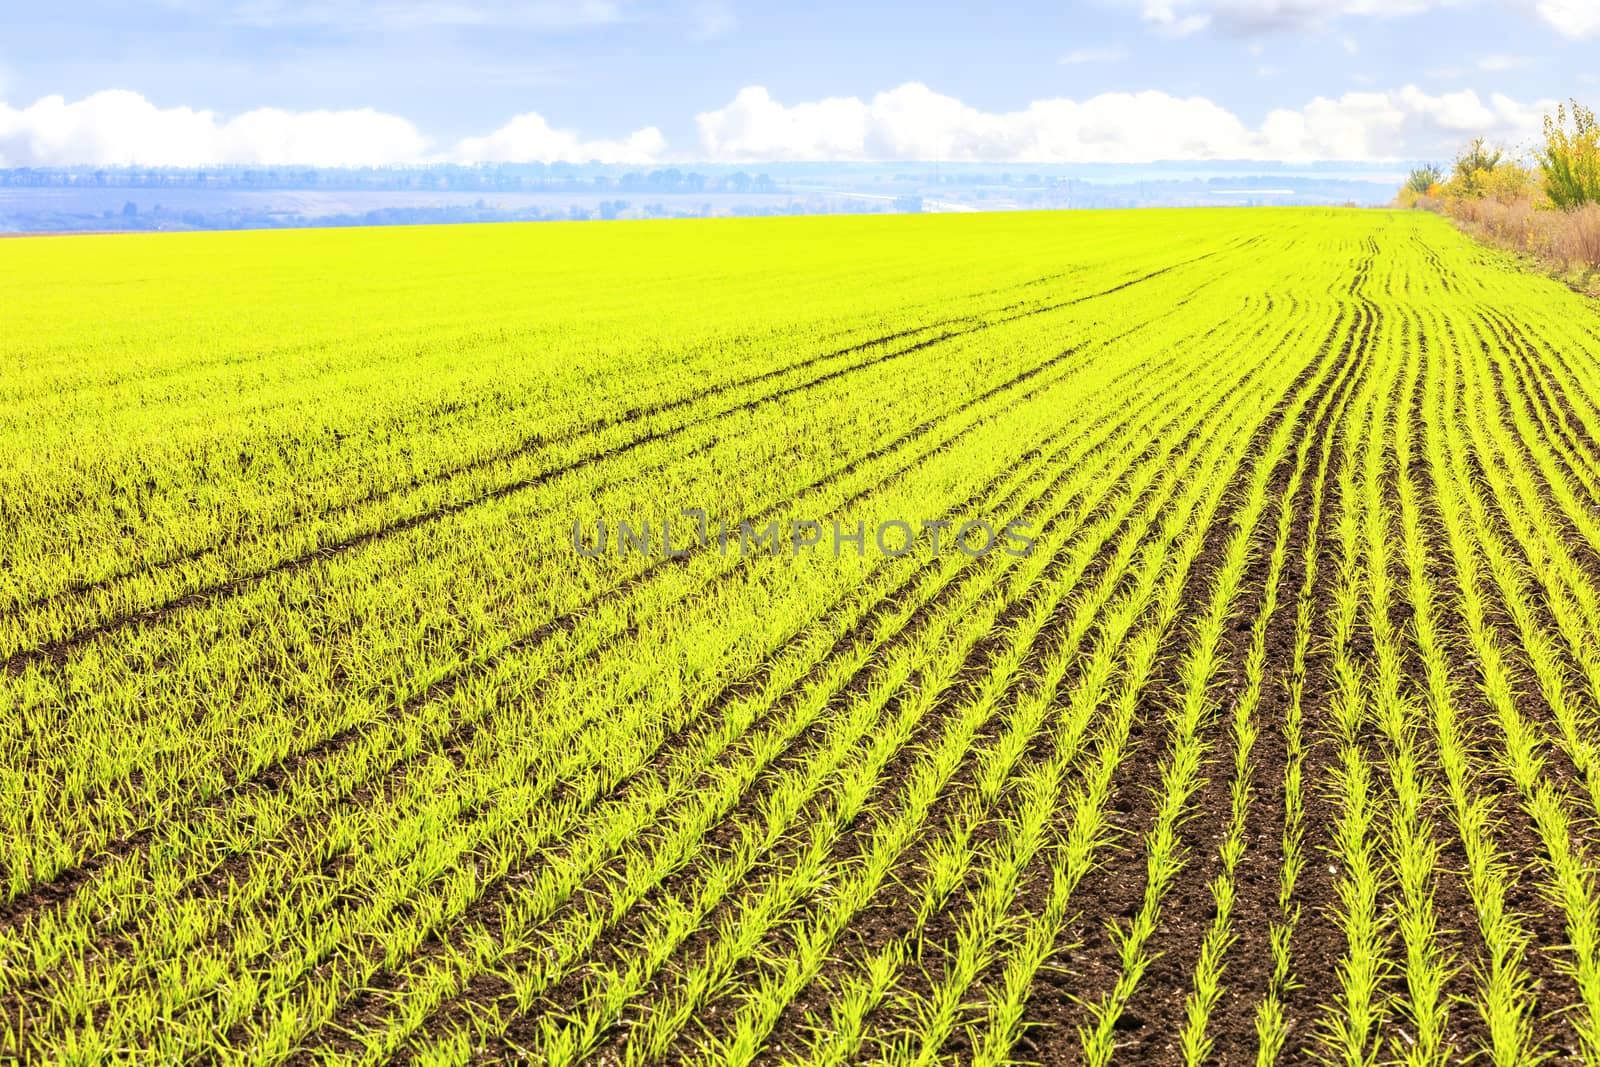 Smooth rows of sprouts of winter wheat sprouted in a vast field. by Sergii